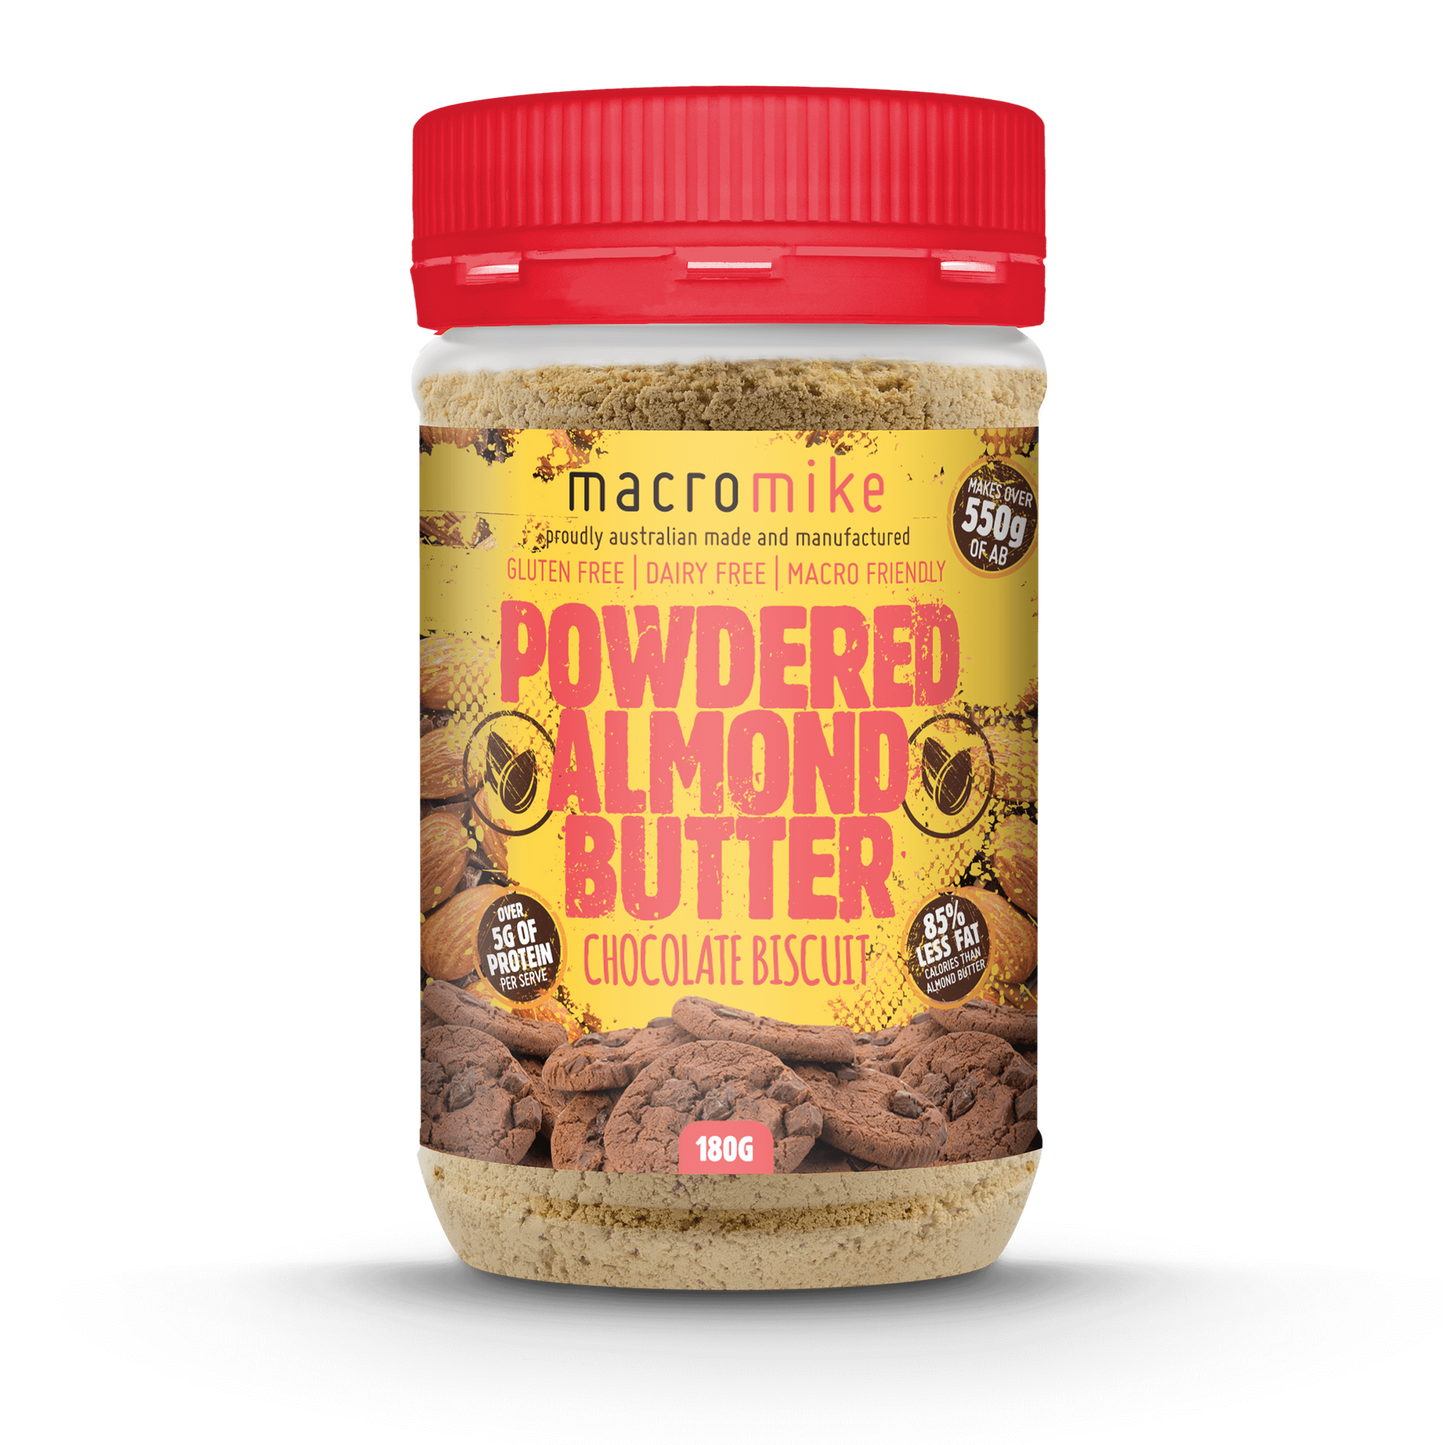 Macro Mike Powdered Almond Butter 180g, Chocolate Biscuit Flavour